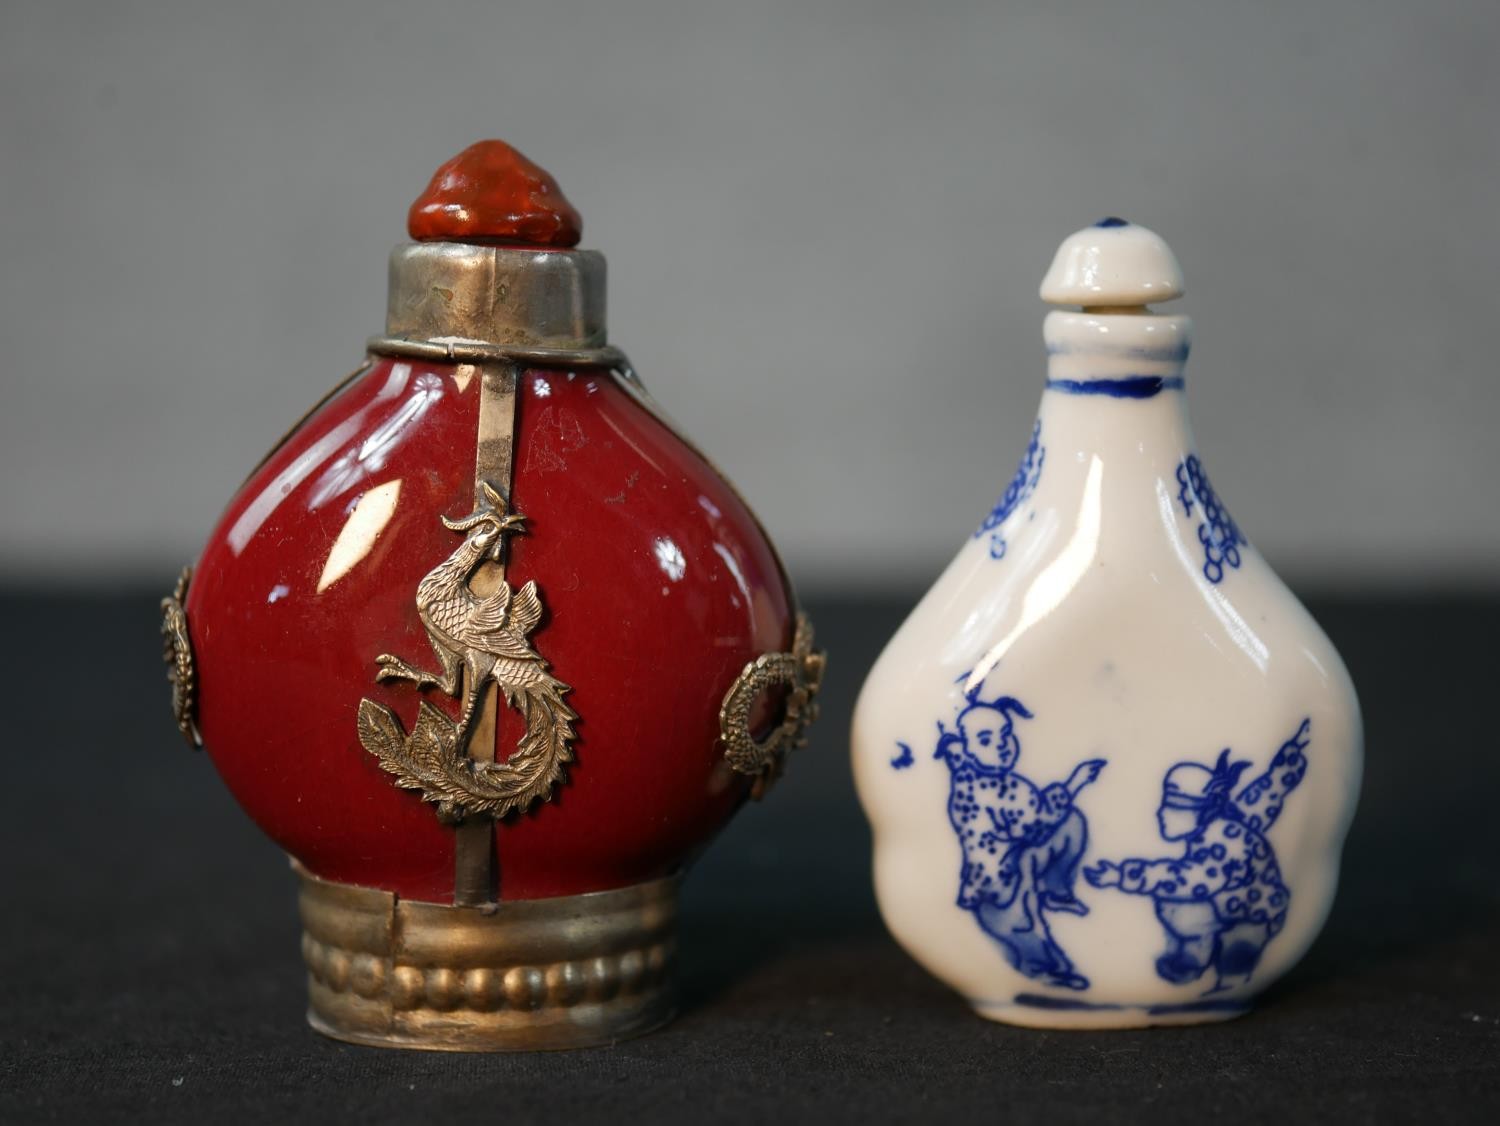 Four 20th century Chinese snuff bottles, one white porcelain with blue figural printed design, a - Image 5 of 6